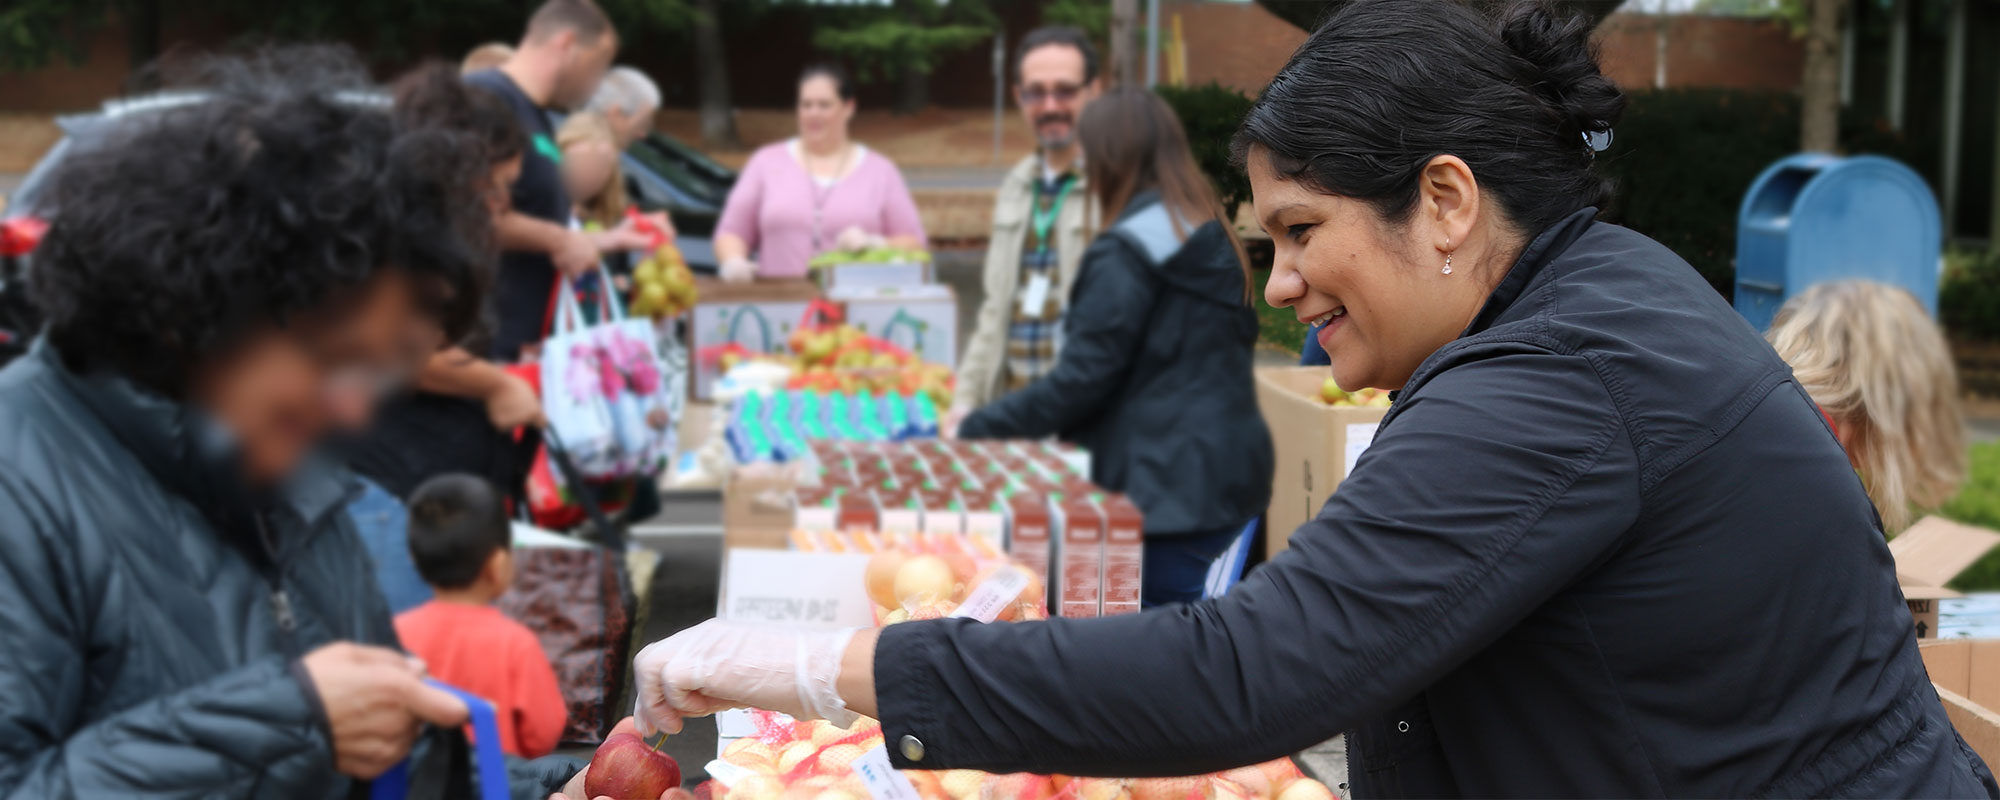 Woman handing out food at the Free Food Market